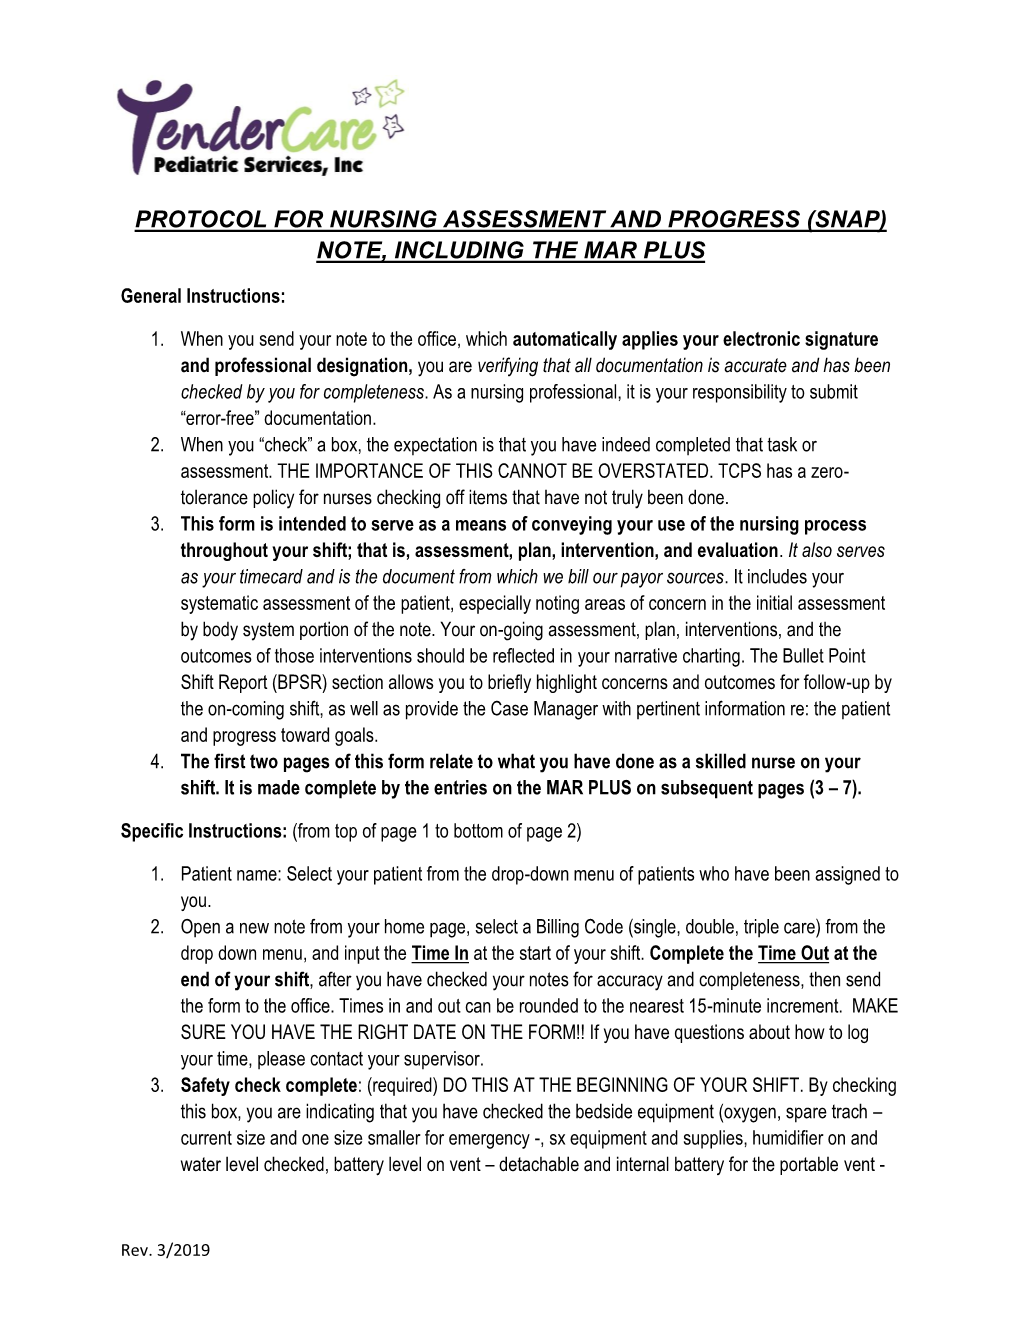 Protocol for Nursing Assessment and Progress (Snap) Note, Including the Mar Plus